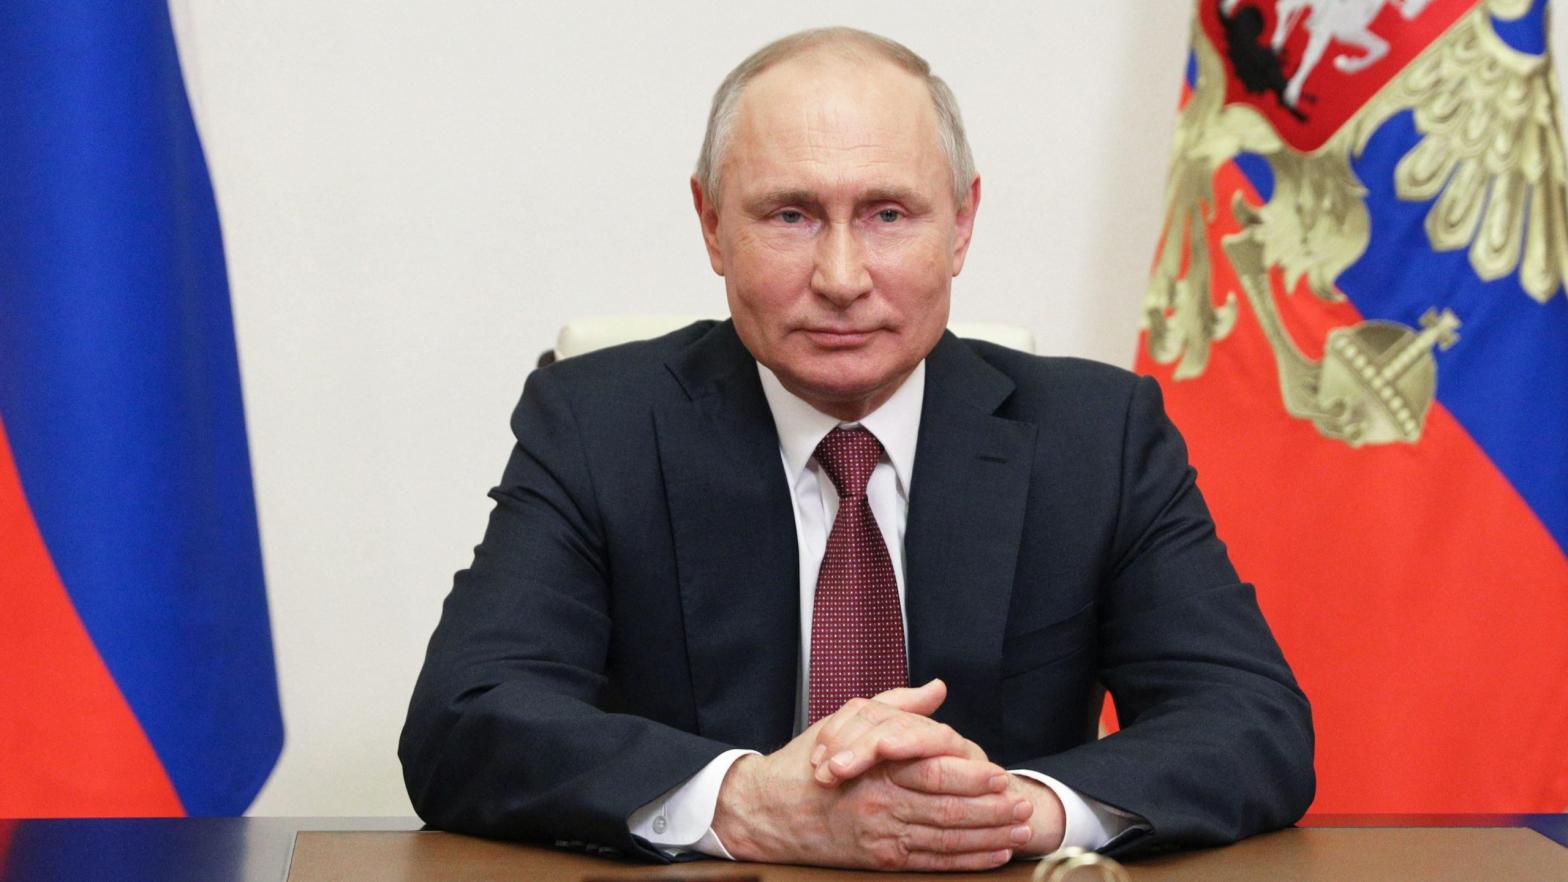 Russian President Vladimir Putin makes a video message to the participants of the Russian Congress on Pediatric Oncology on May 27, 2021.  (Photo: Sergei ILYIN / Sputnik / AFP, Getty Images)